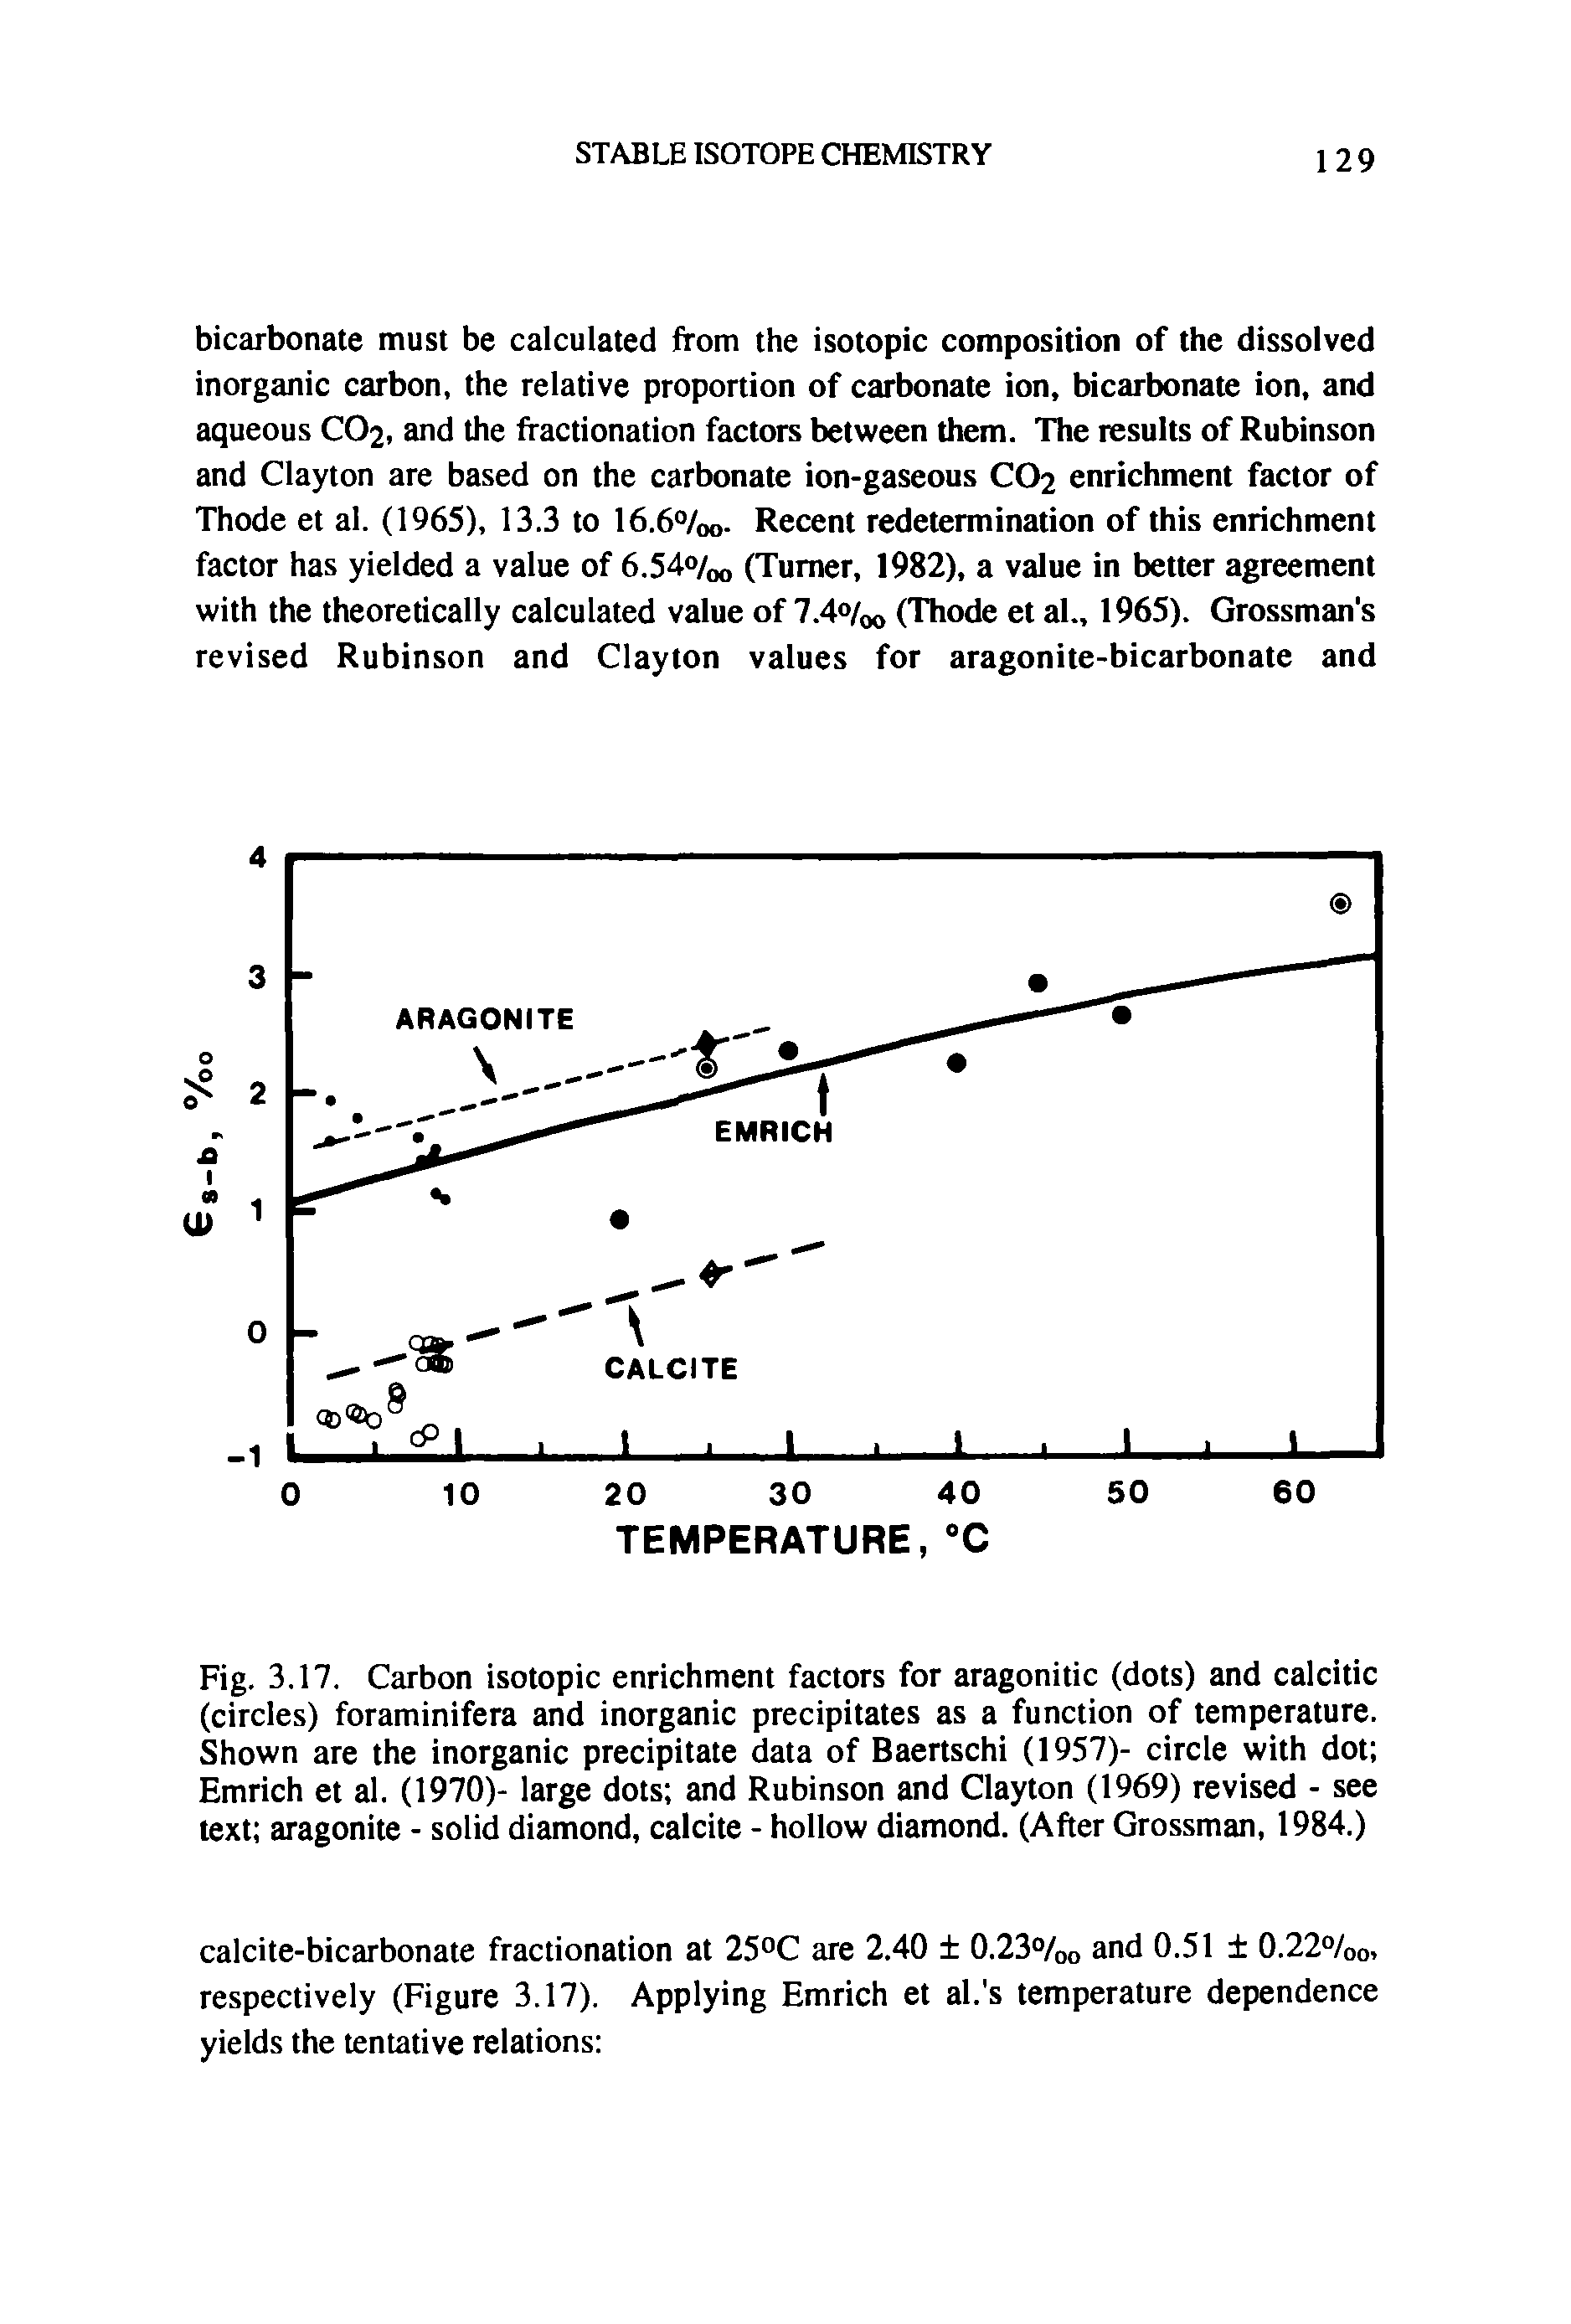 Fig. 3.17. Carbon isotopic enrichment factors for aragonitic (dots) and calcitic (circles) foraminifera and inorganic precipitates as a function of temperature. Shown are the inorganic precipitate data of Baertschi (1957)- circle with dot Emrich et al. (1970)- large dots and Rubinson and Clayton (1969) revised - see text aragonite - solid diamond, calcite - hollow diamond. (After Grossman, 1984.)...